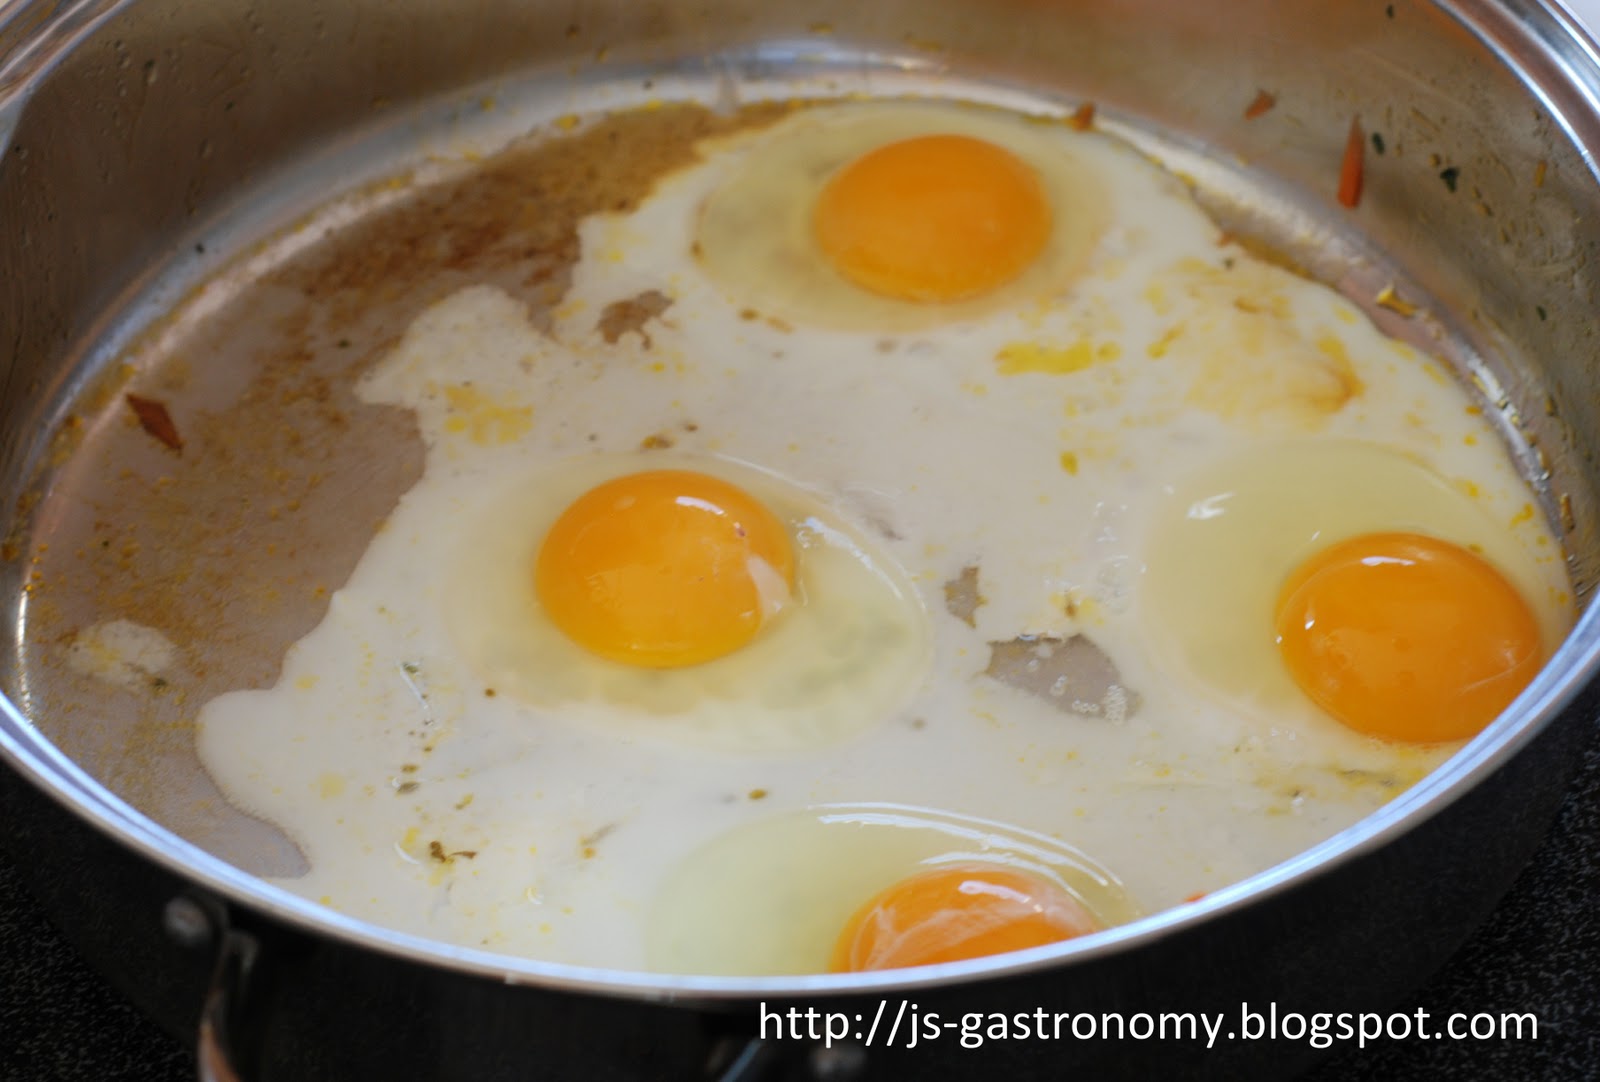 Matfer Bourgeat after 2 weeks and dozens of fried eggs